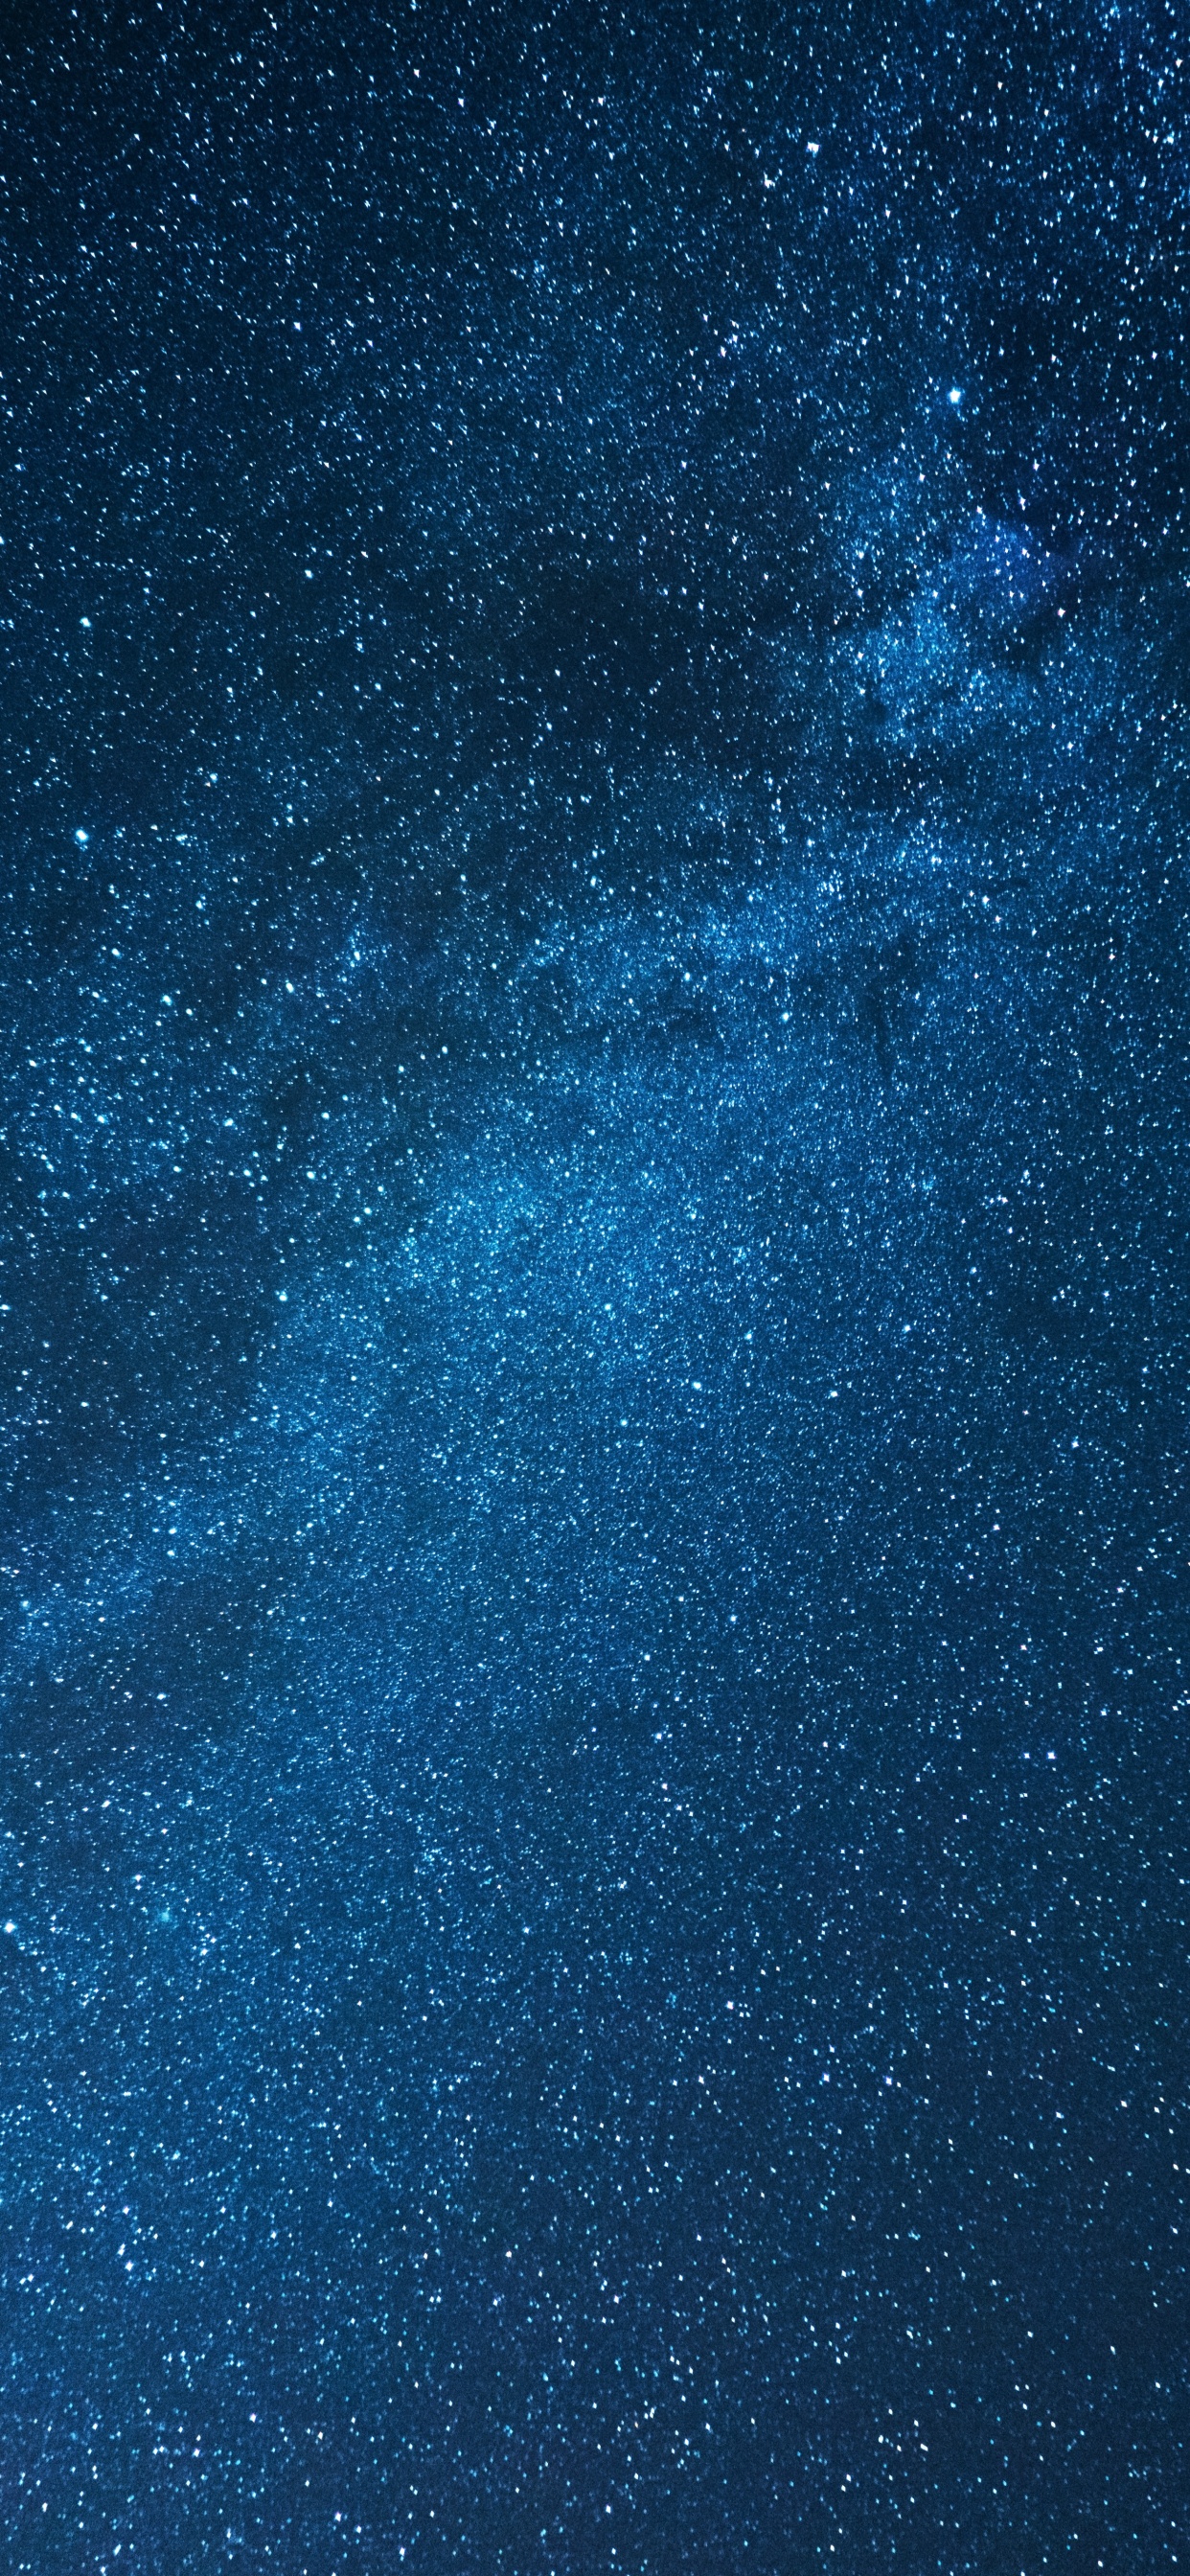 Blue and White Starry Night Sky. Wallpaper in 1242x2688 Resolution